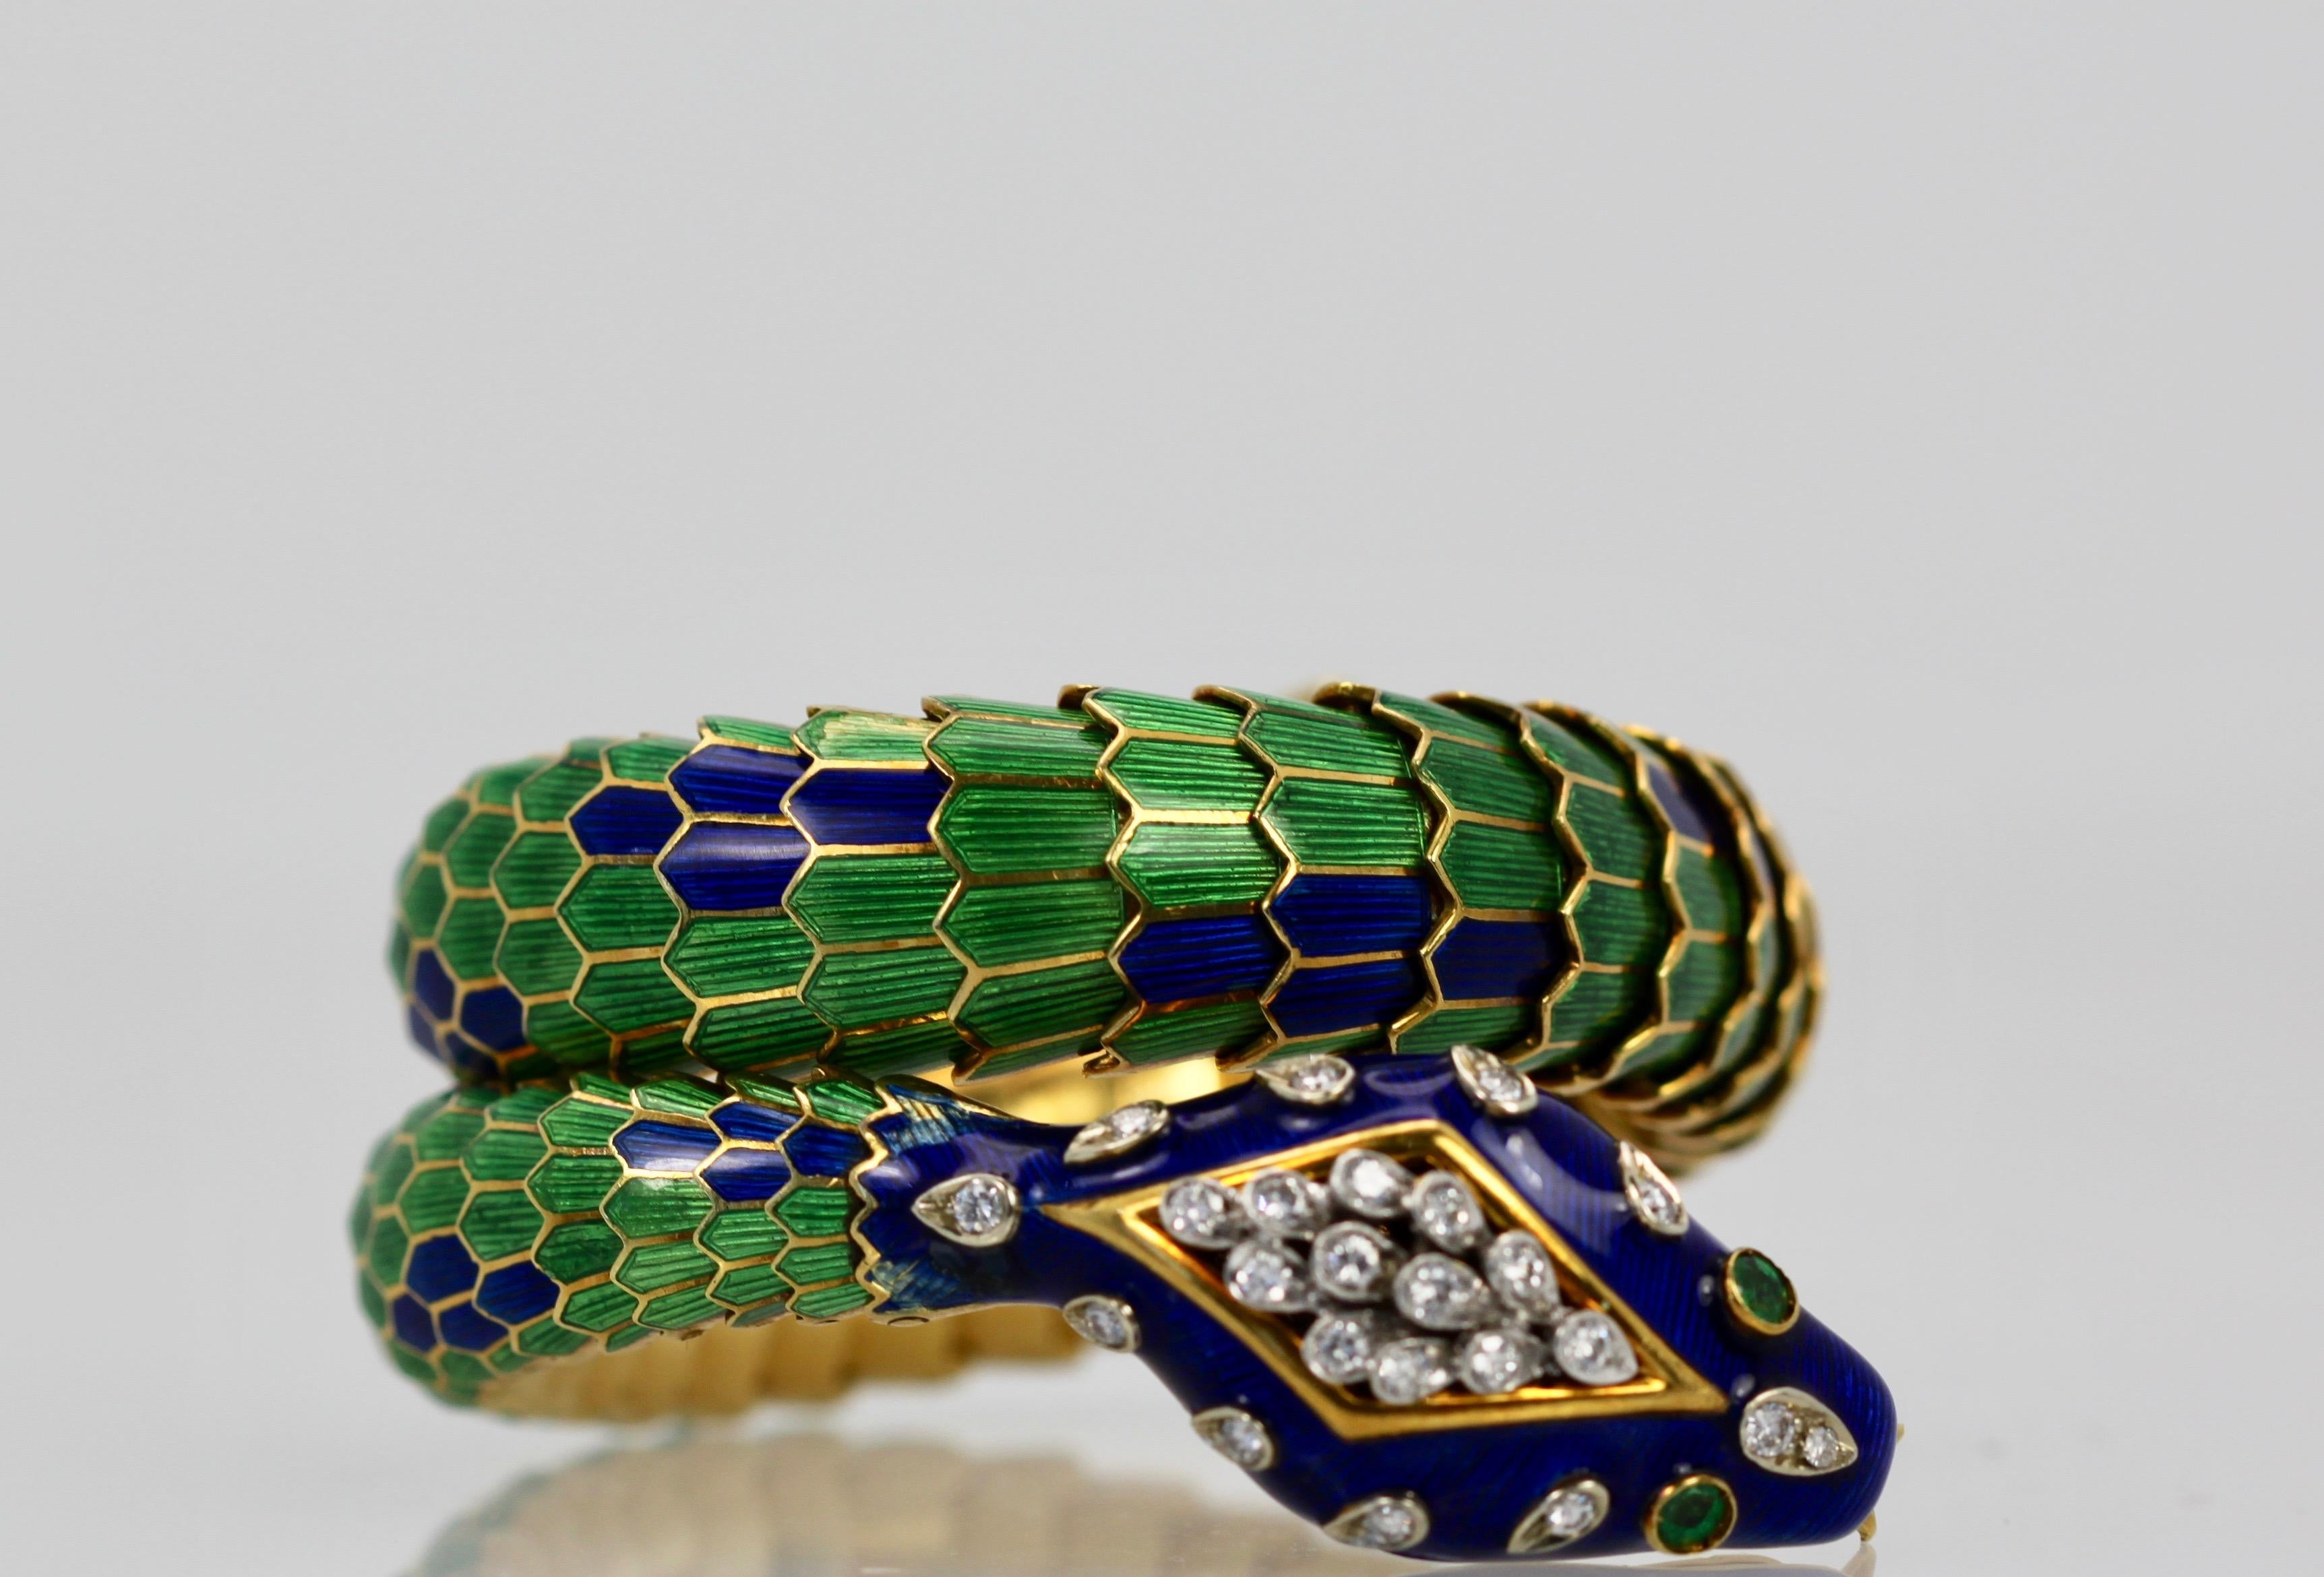 Enamel Articulated Snake Serpent Bracelet Diamond Head 18 Karat In Excellent Condition For Sale In North Hollywood, CA